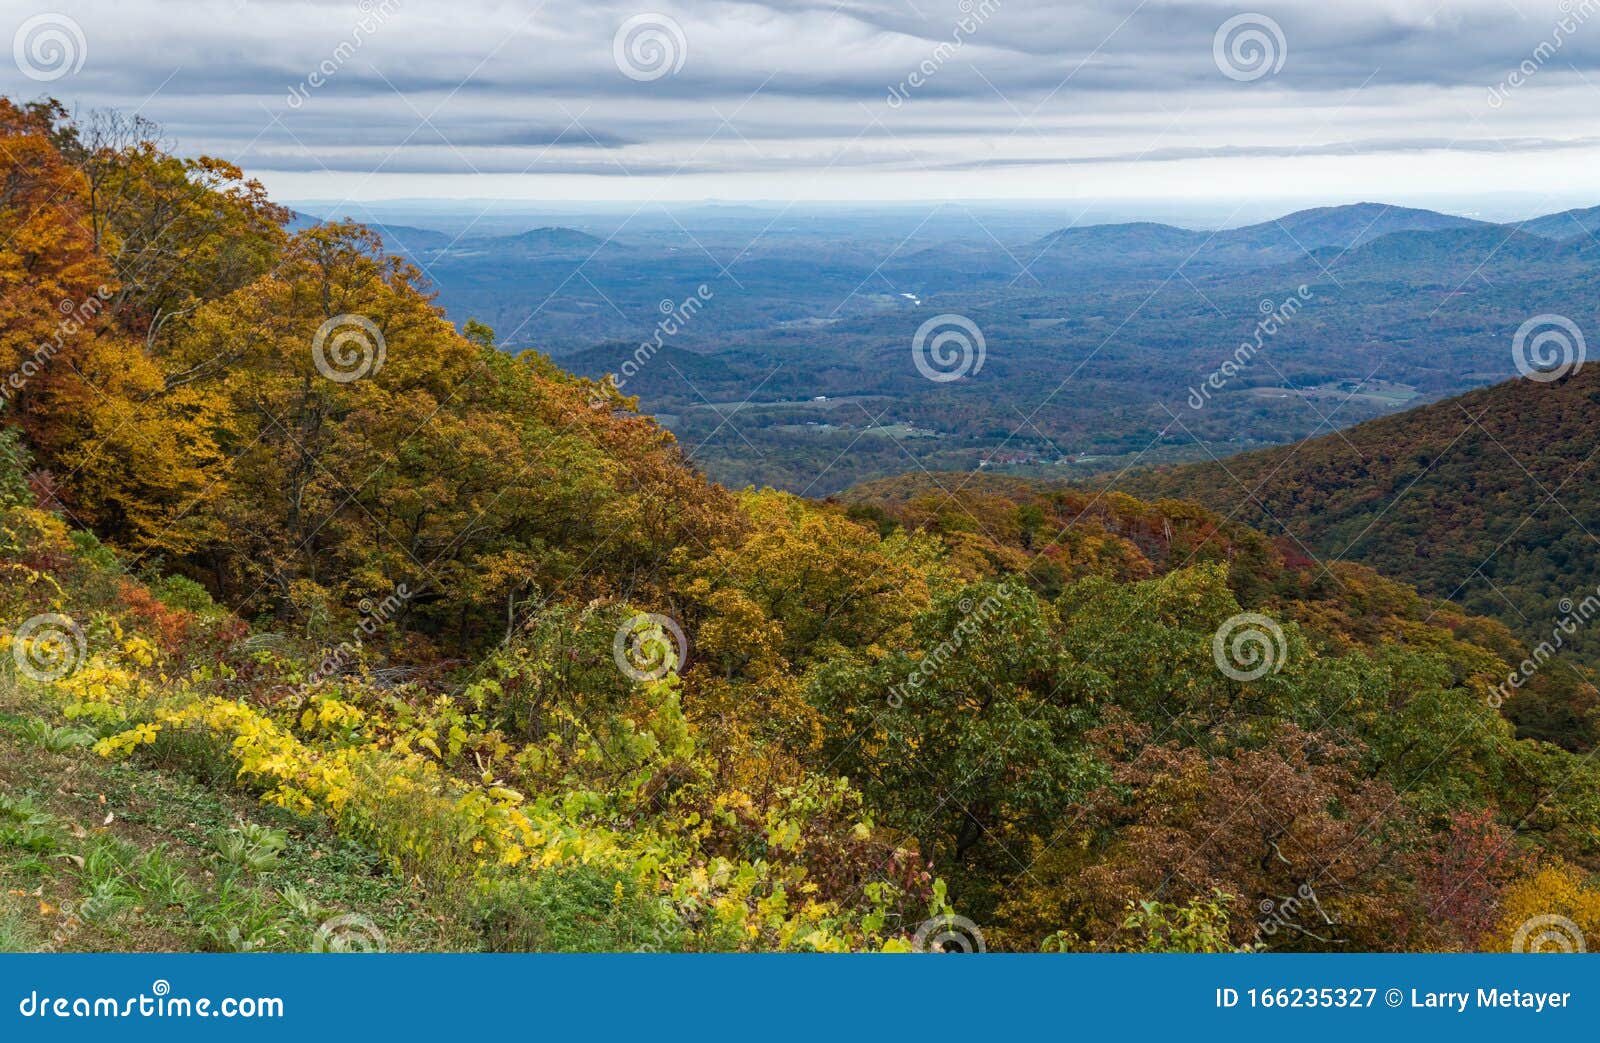 North Fork and Clark WV panorama c1911 24x36 